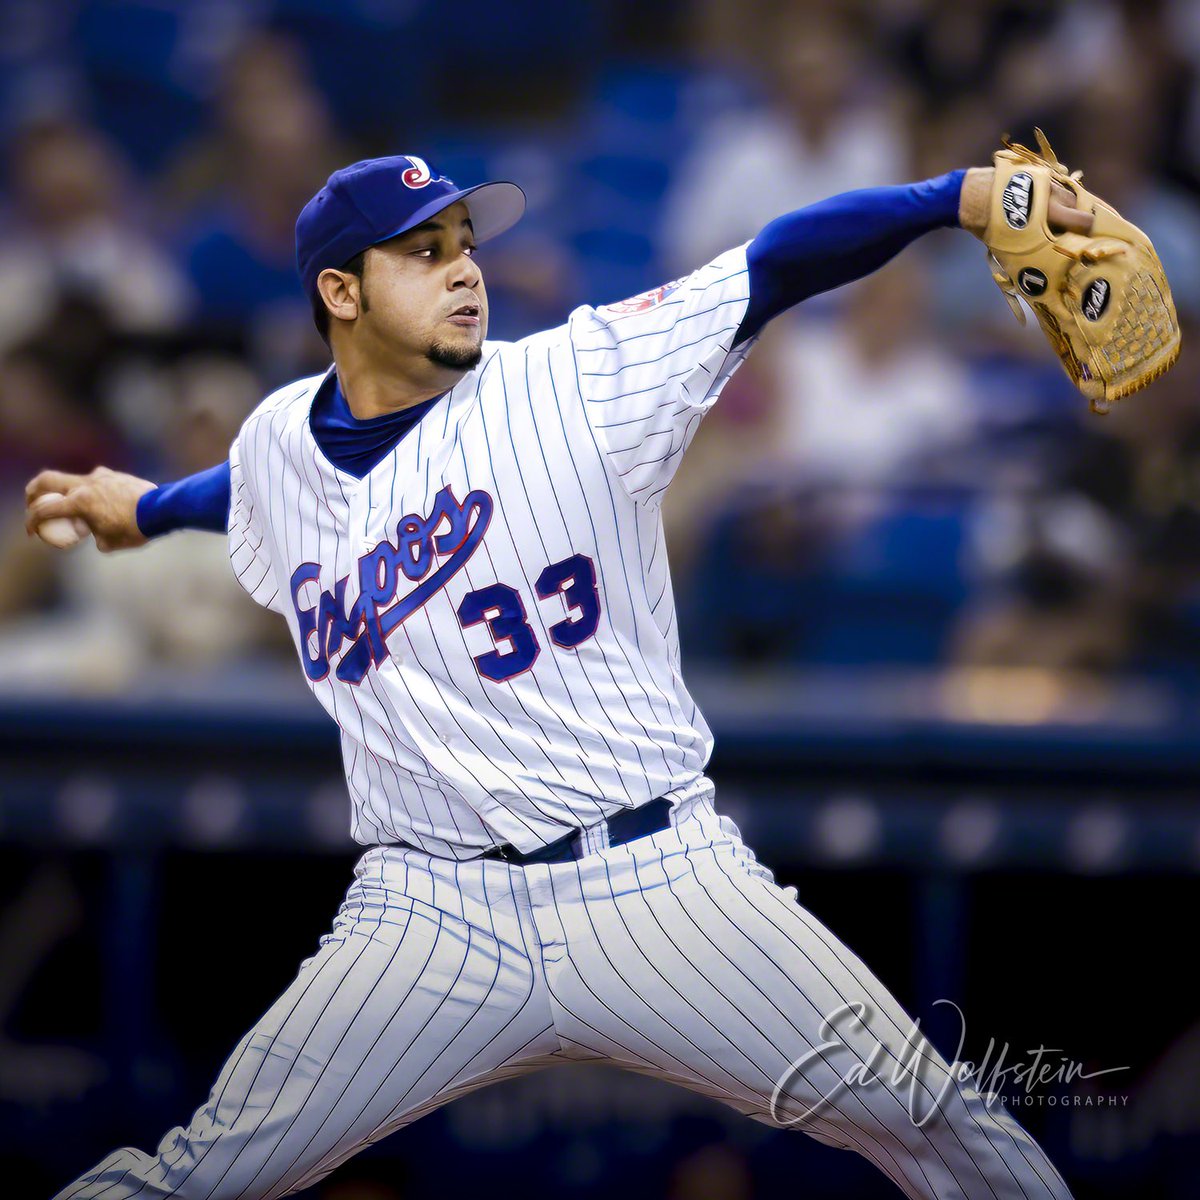 Happy Birthday to Expo RHP Claudio Vargas! He started this game against the White Sox, just one day before his 26th birthday, on June 18, 2004. #expos #MontrealExpos #Montreal #exposmontreal #exposfest
#ExposBaseball #MontrealBaseball 
#baseballamerica #baseball
#baseballislife